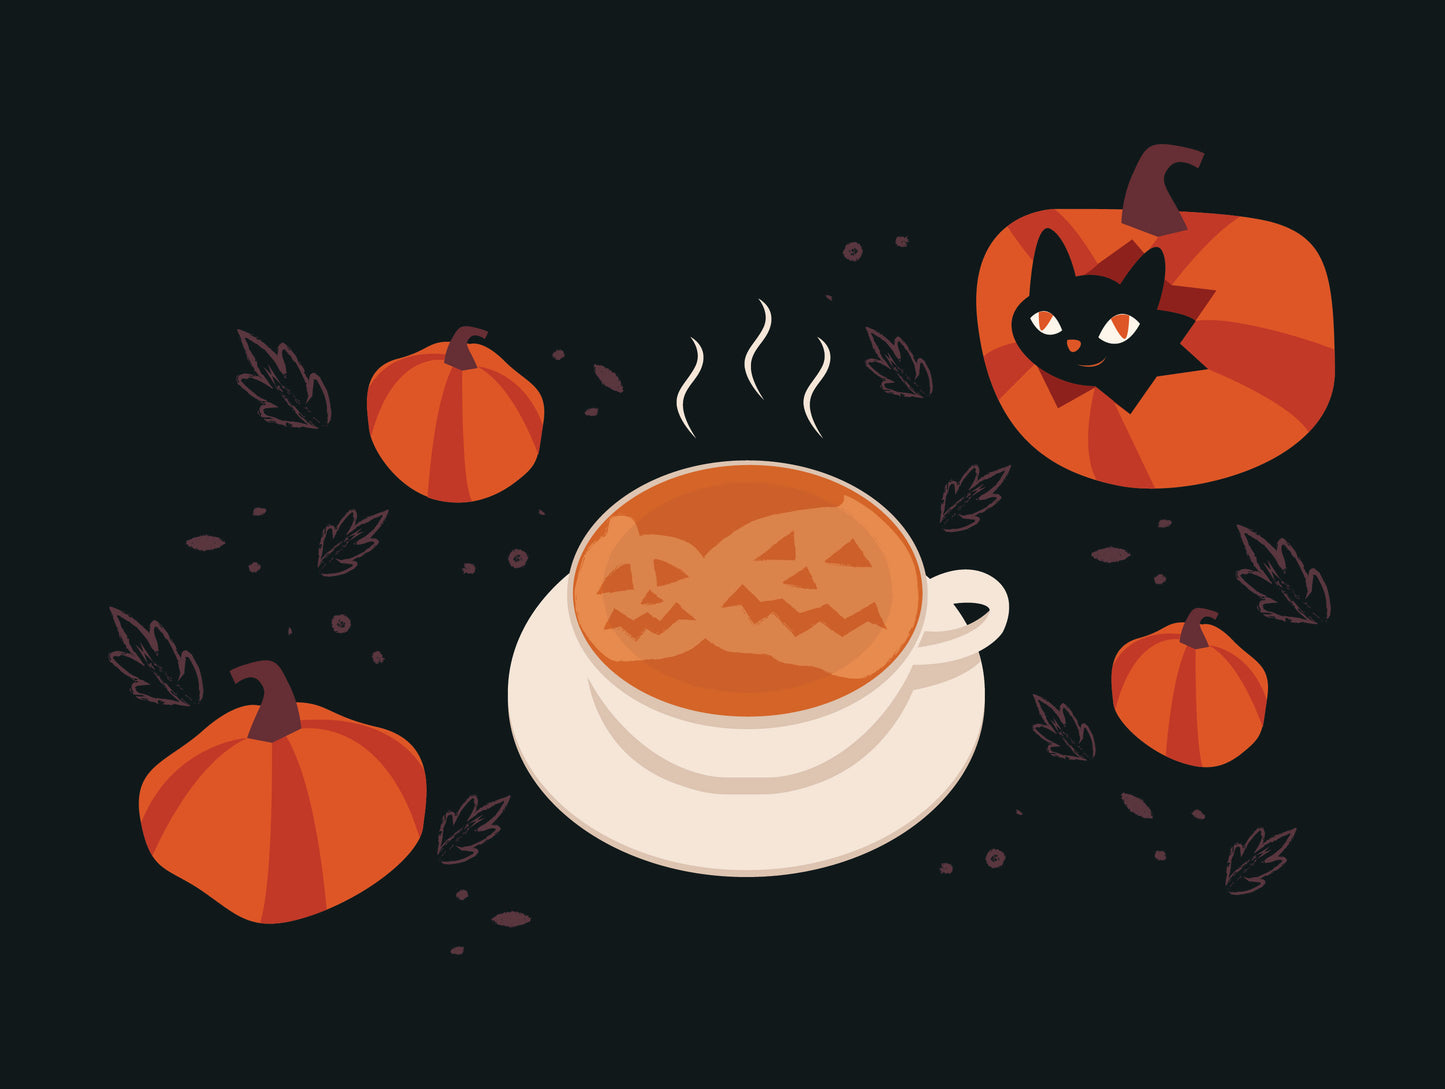 Favorite Halloween Drinks to Stay Warm While Trick or Treating